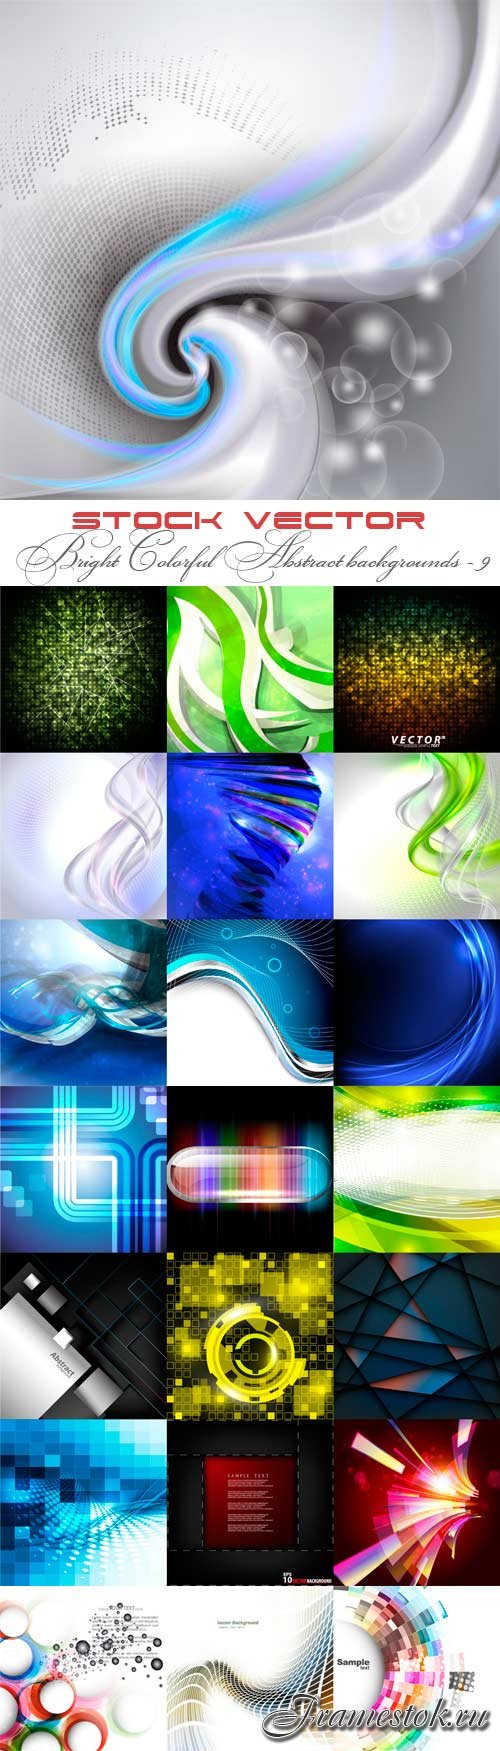 Bright colorful abstract backgrounds vector - 9